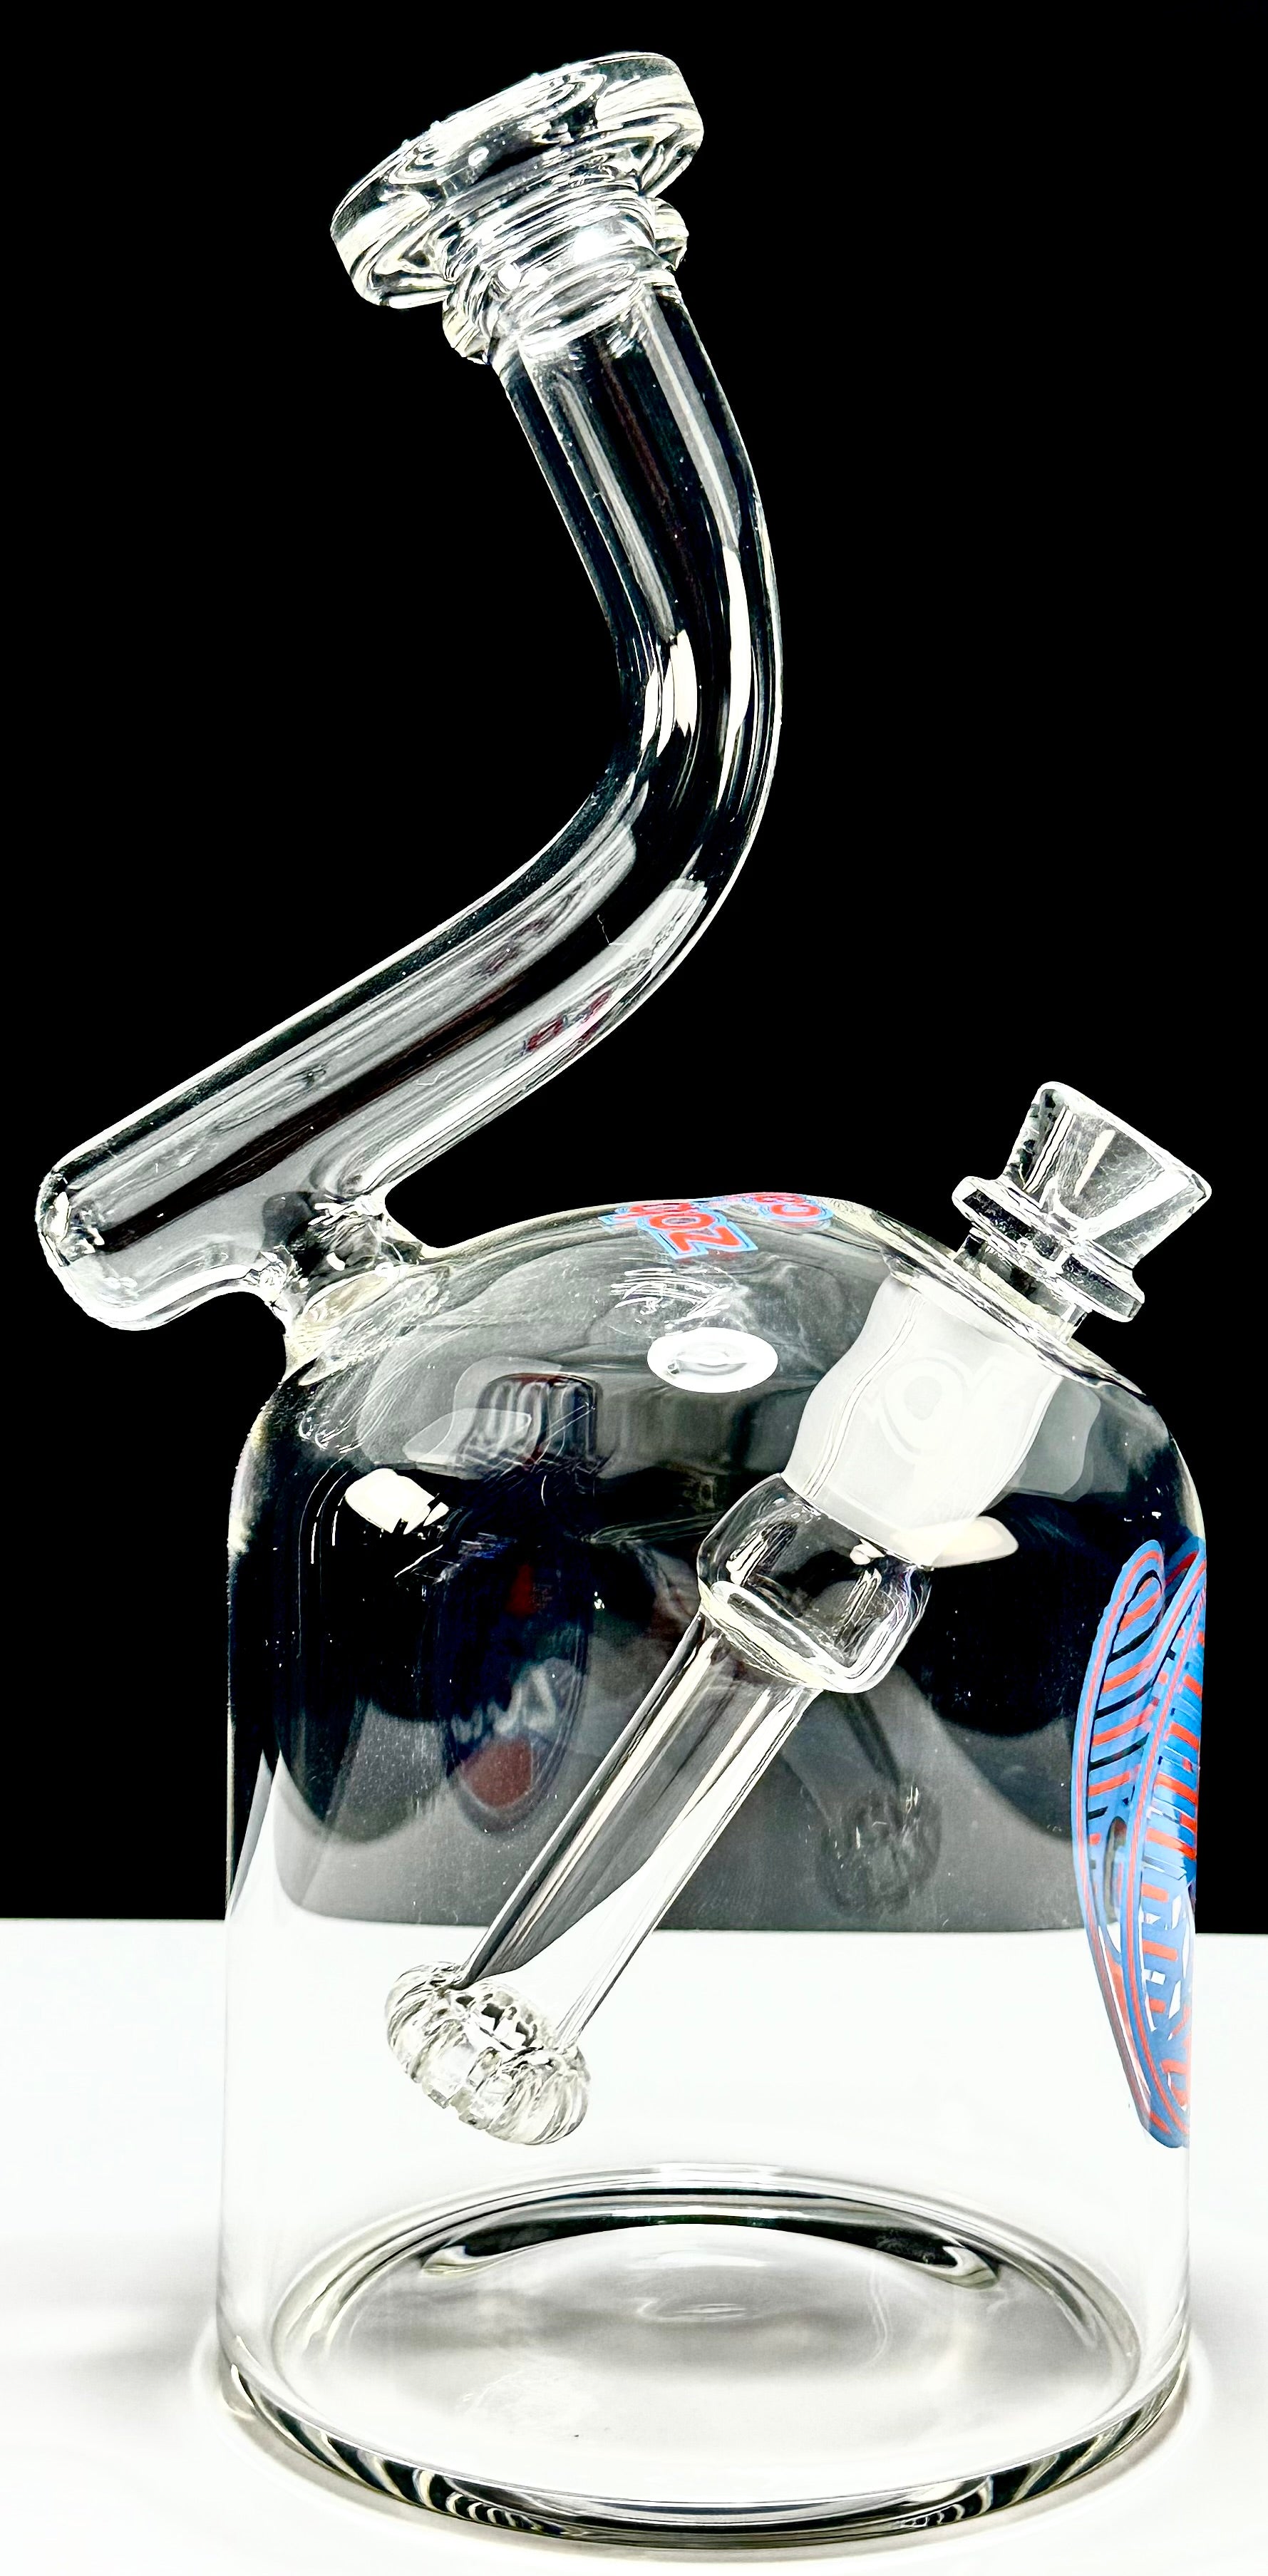 Zob 10.5 inch 110mm Chamber Bubbler with Fixed Flat Disc Diffuser Orange & Blue Label